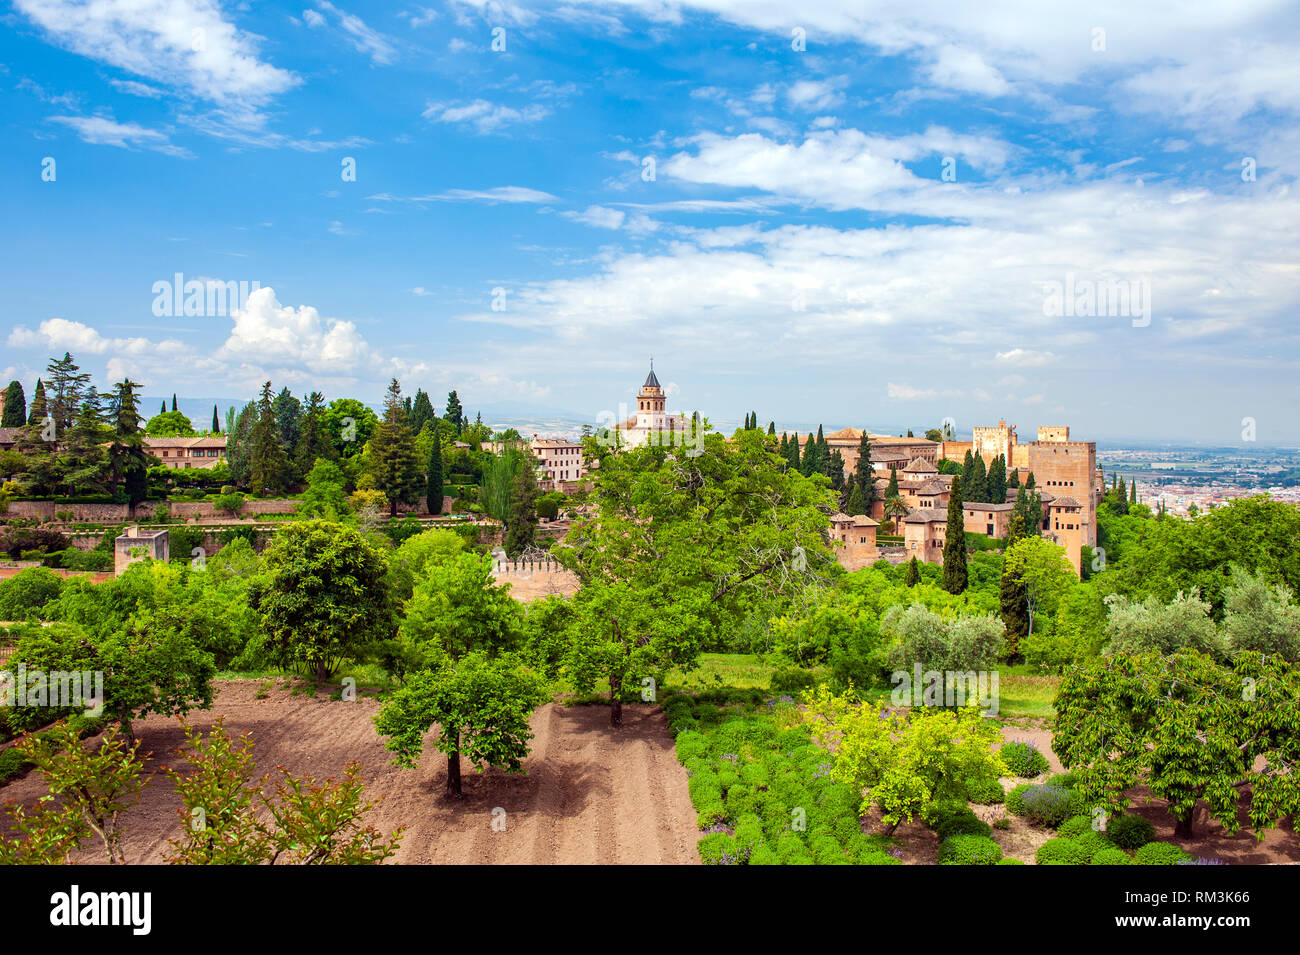 The gardens of the Generalife at the Alhambra, a 13th century Moorish palace complex in Granada, Spain. Built on Roman ruins, the Alhambra was later i Stock Photo